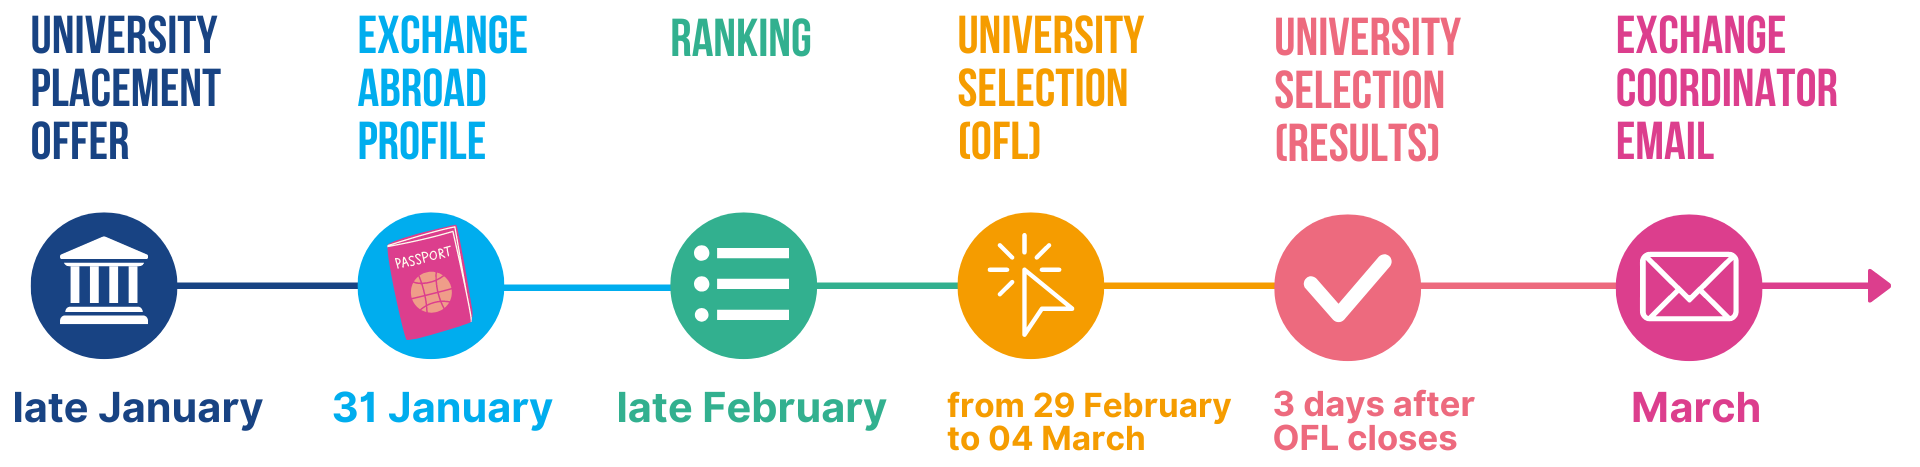 University Selection Timelines (5).png